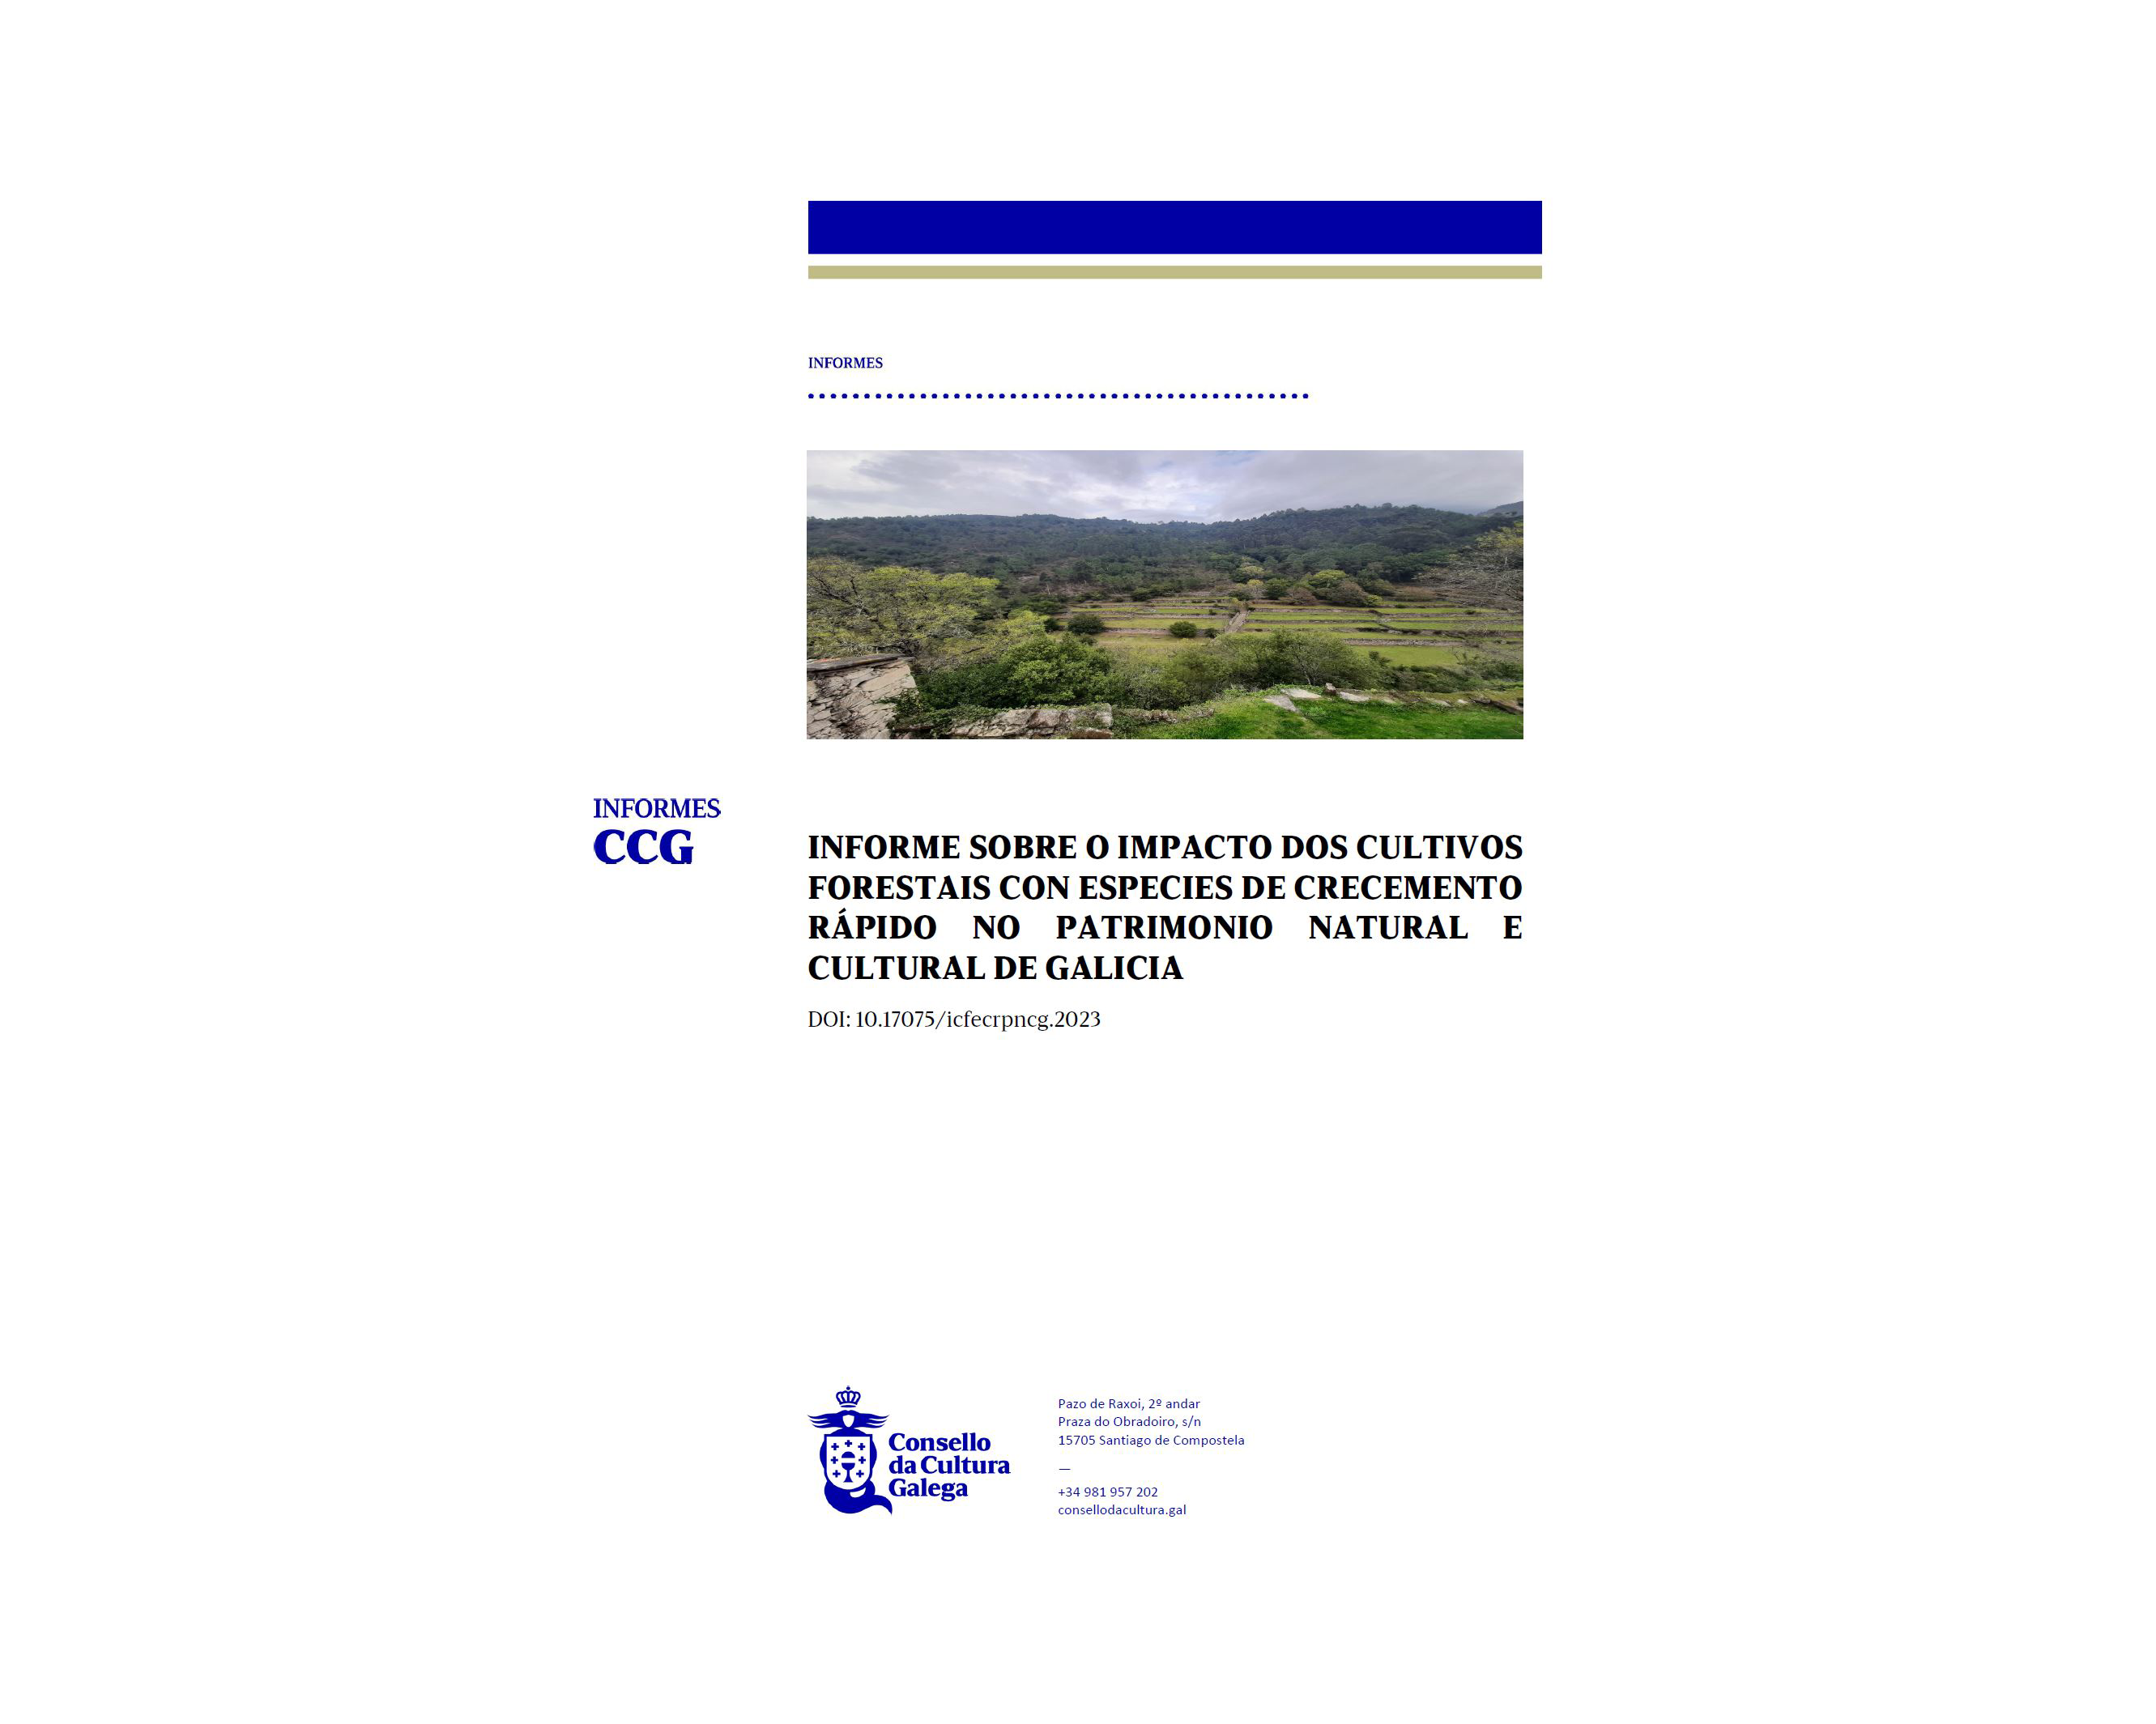 Report on the impact of forestry crops with fast-growing species on the natural and cultural heritage of Galicia image